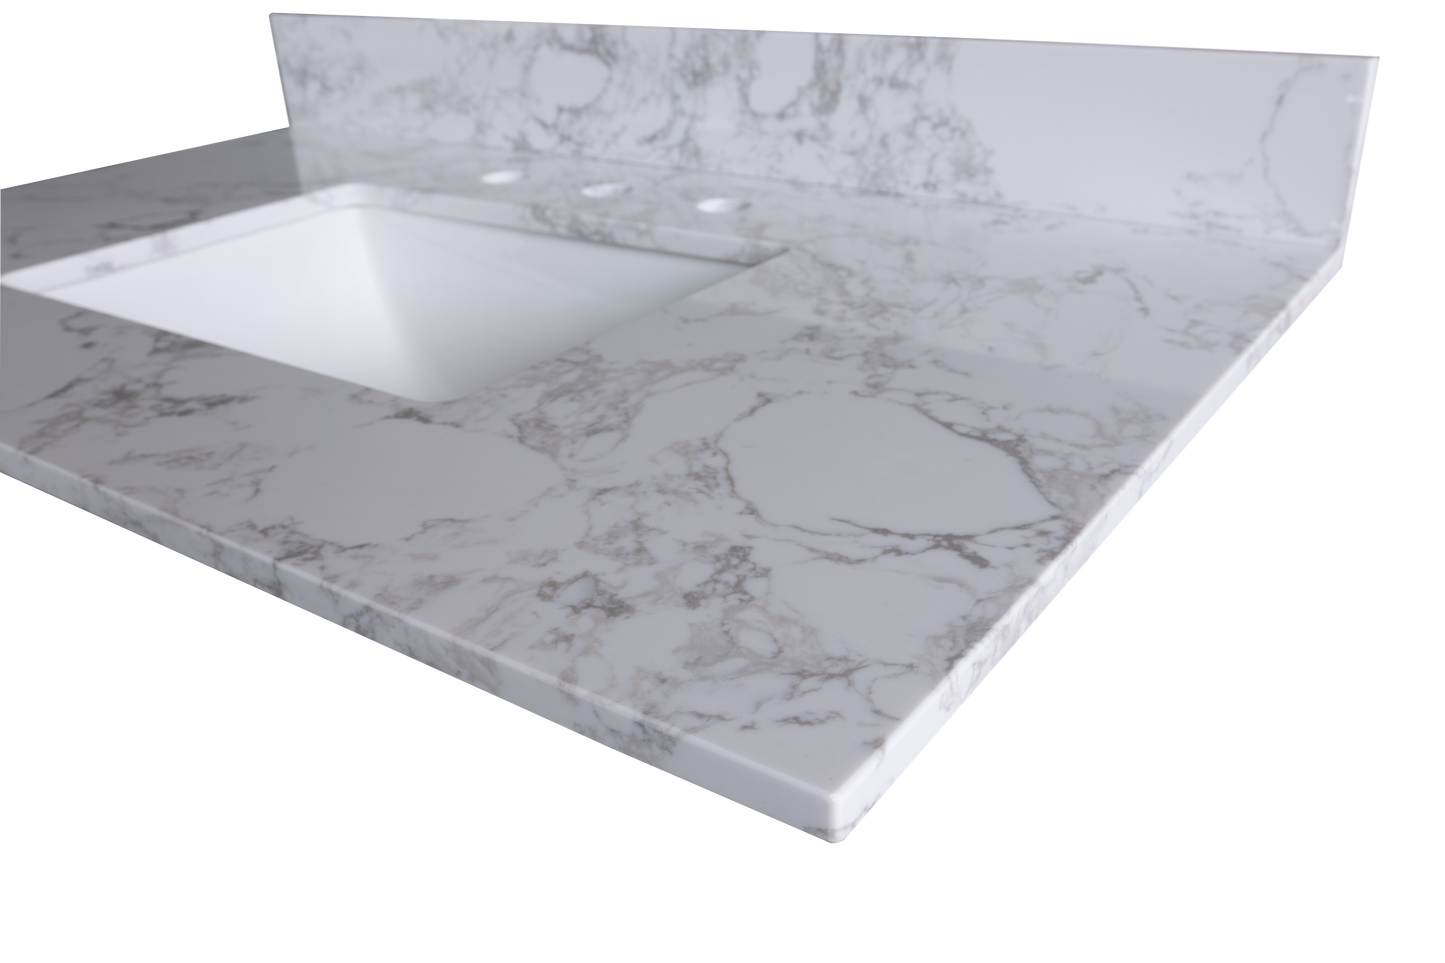 43"x22" bathroom stone vanity top engineered stone carrara white marble color with rectangle undermount ceramic sink and 3 faucet hole with back splash .